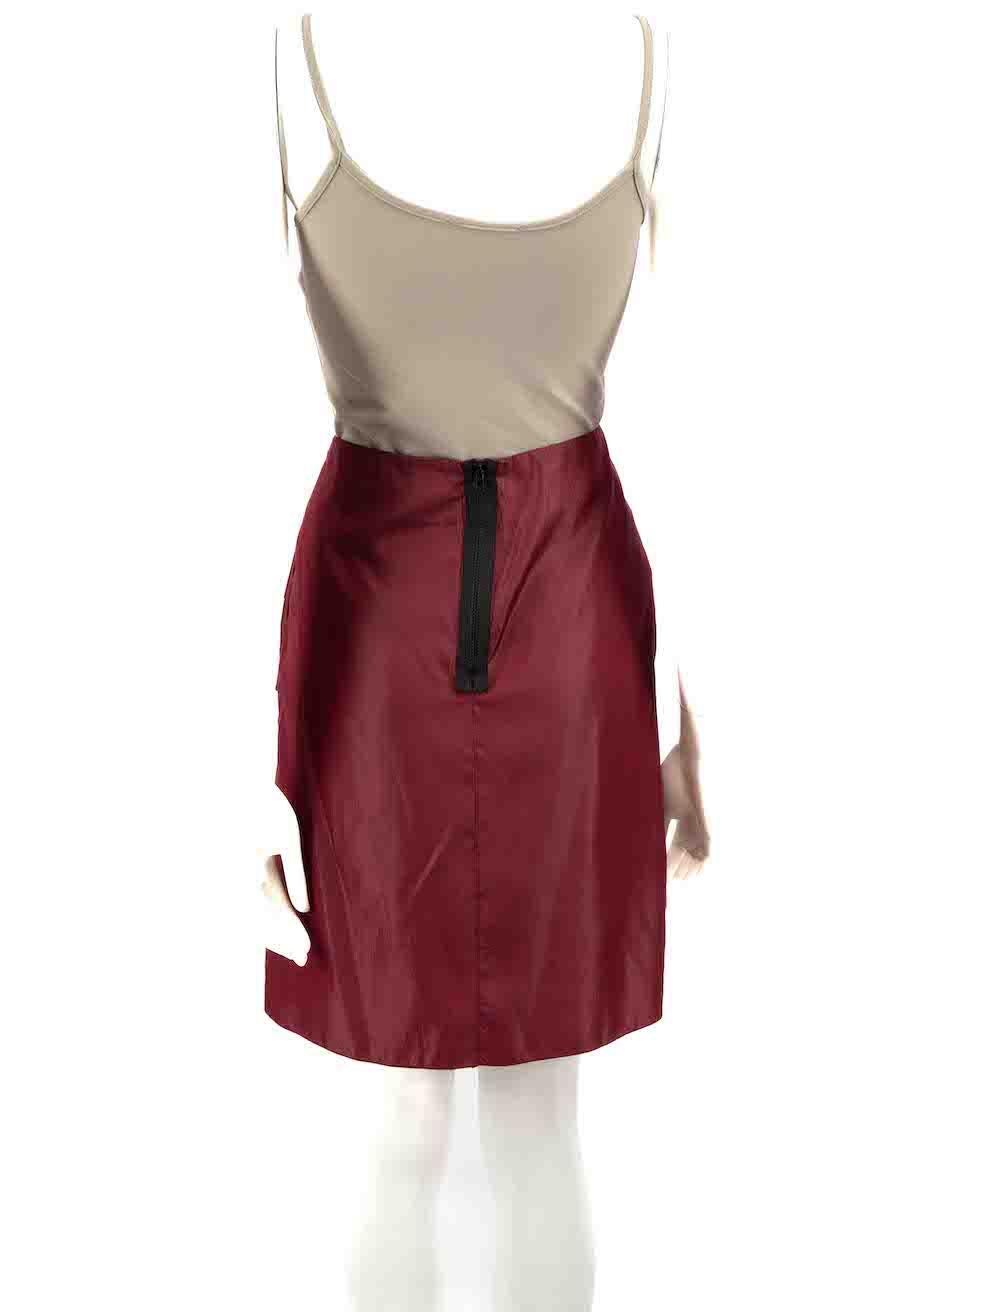 Marni Summer 2010 Burgundy Drape Detail Skirt Size S In Fair Condition For Sale In London, GB